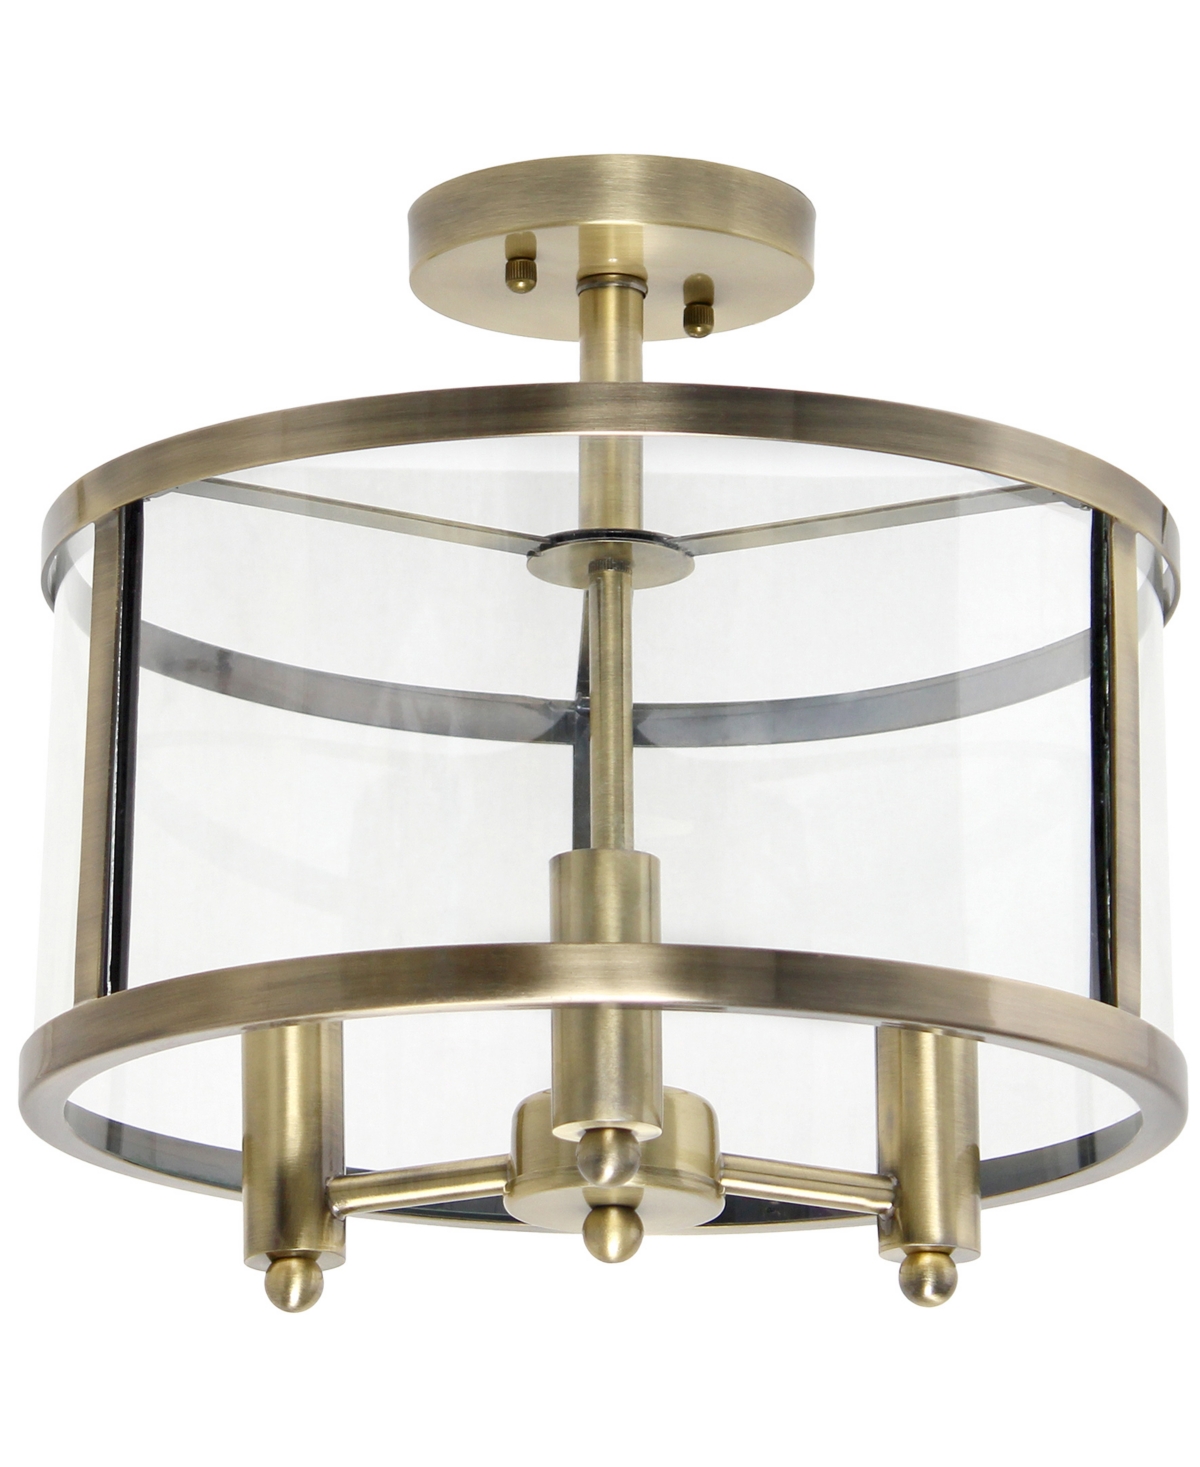 All The Rages 3-light 13" Industrial Farmhouse Glass And Metallic Accented Semi-flush Mount In Antique Brass